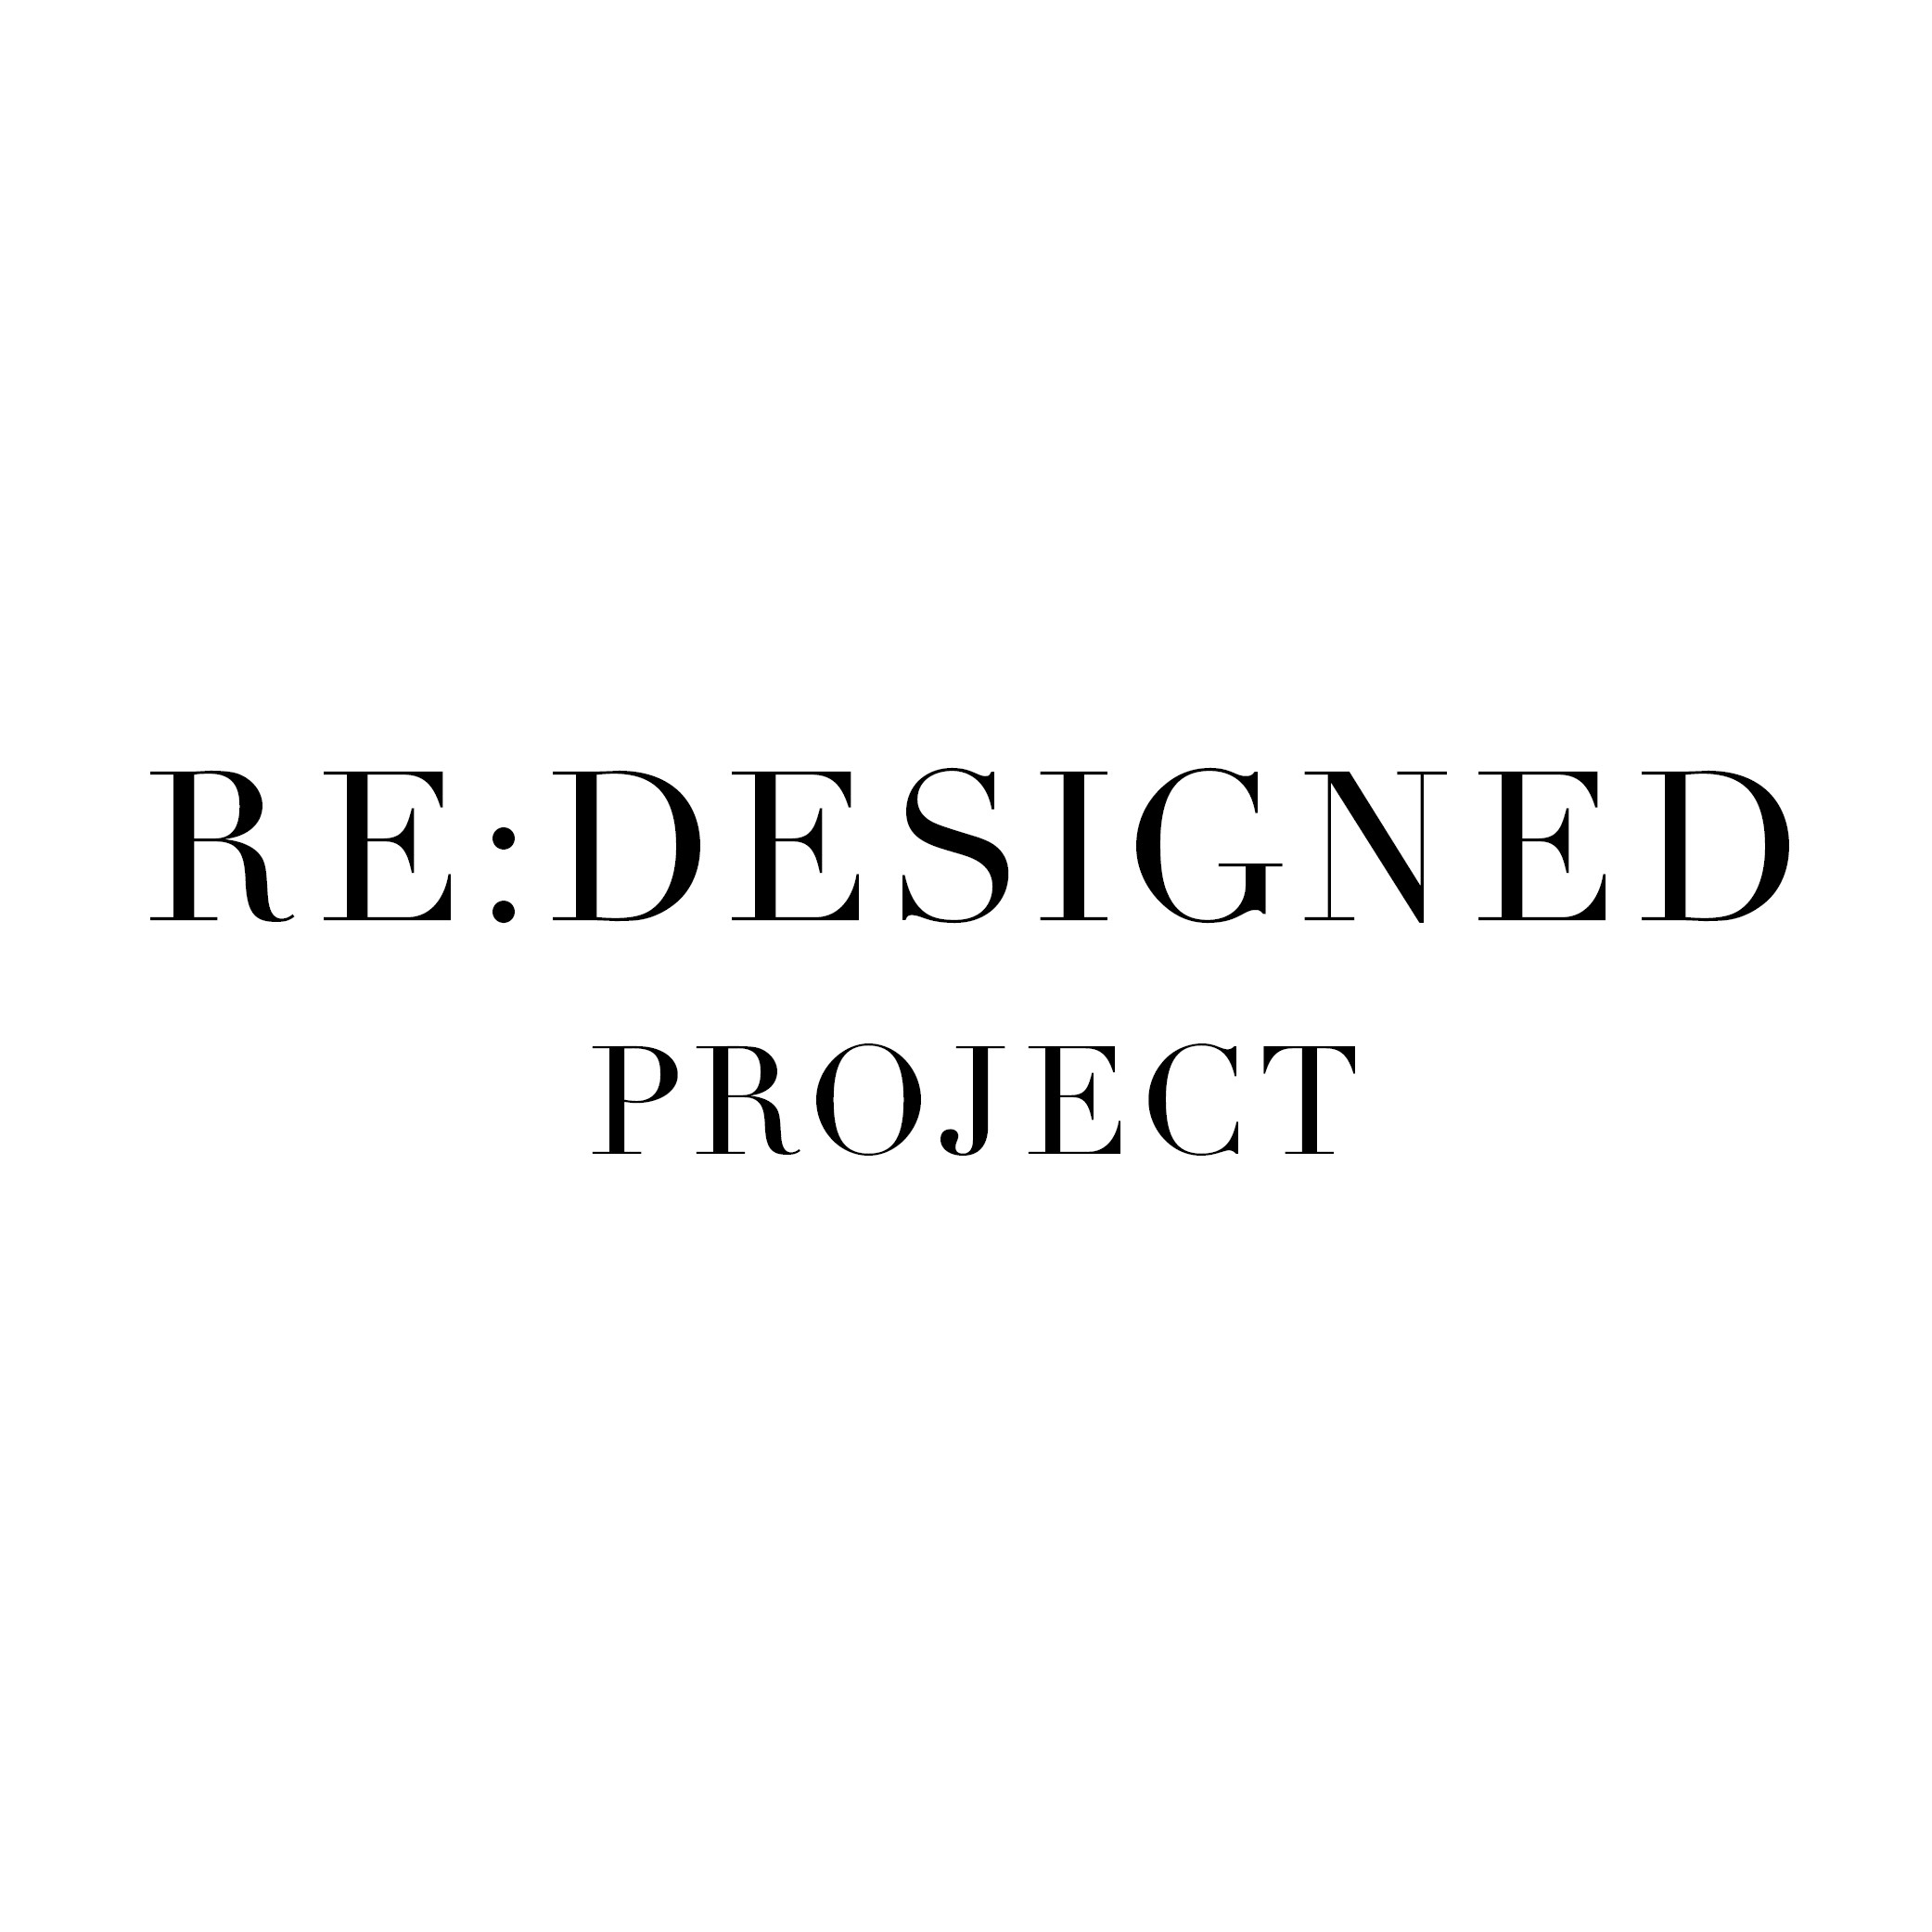 Re:designed Project